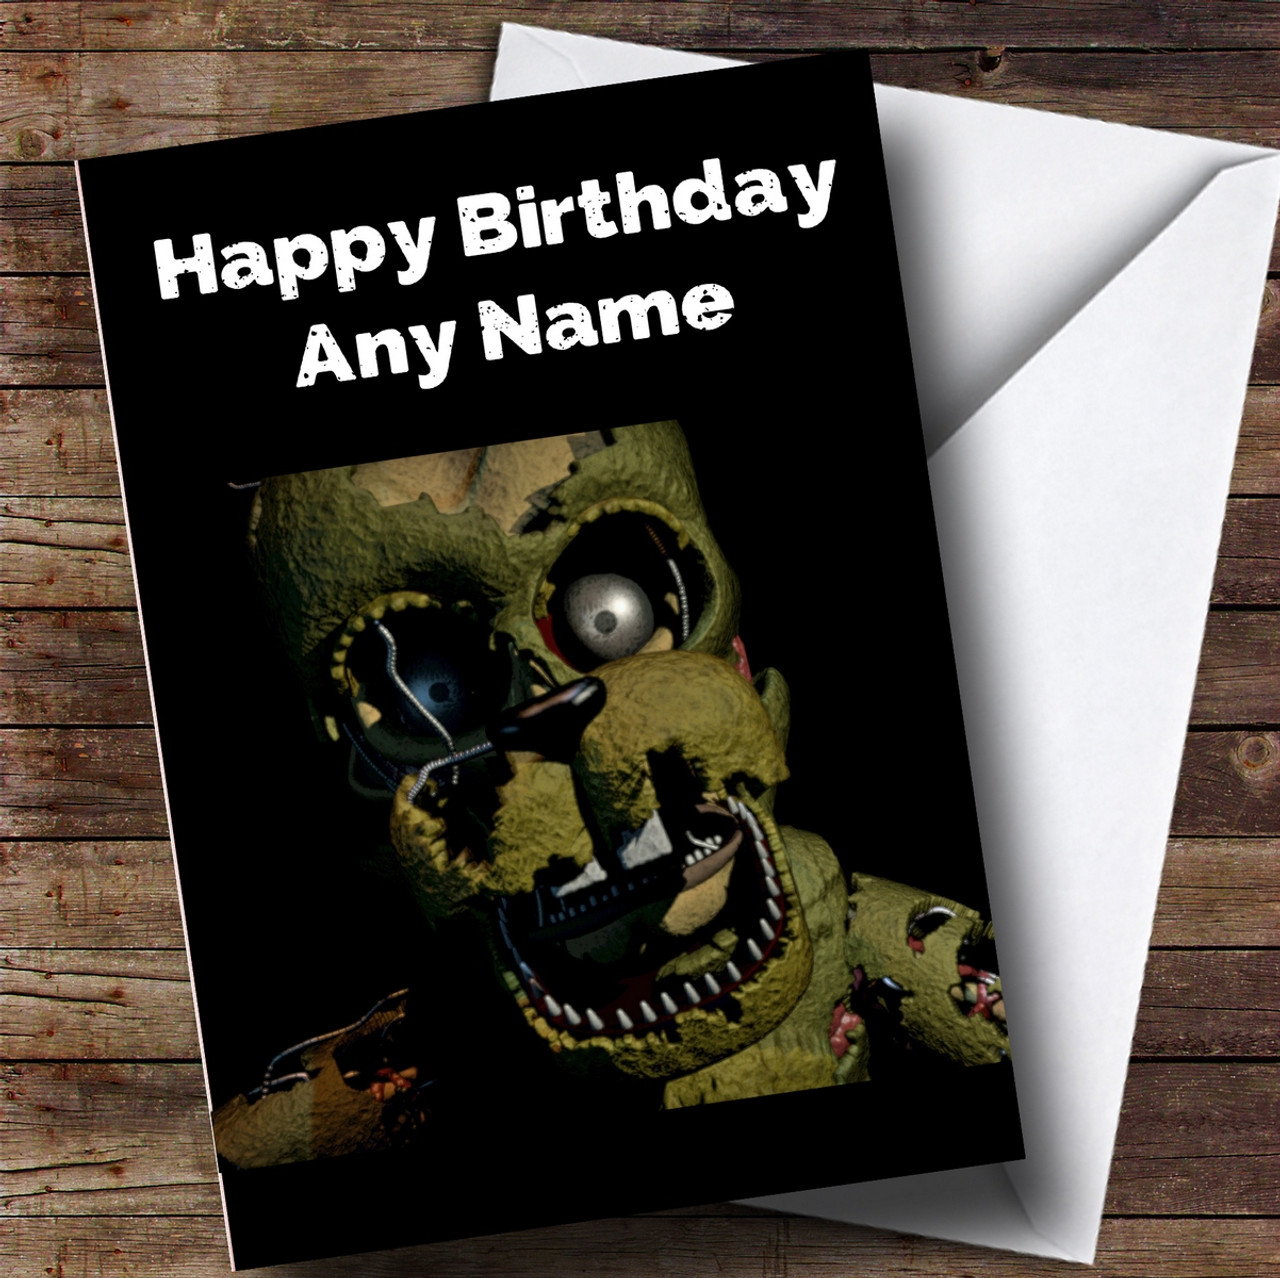 Happy Birthday FNaF 3! Did a quick Springtrap painting to